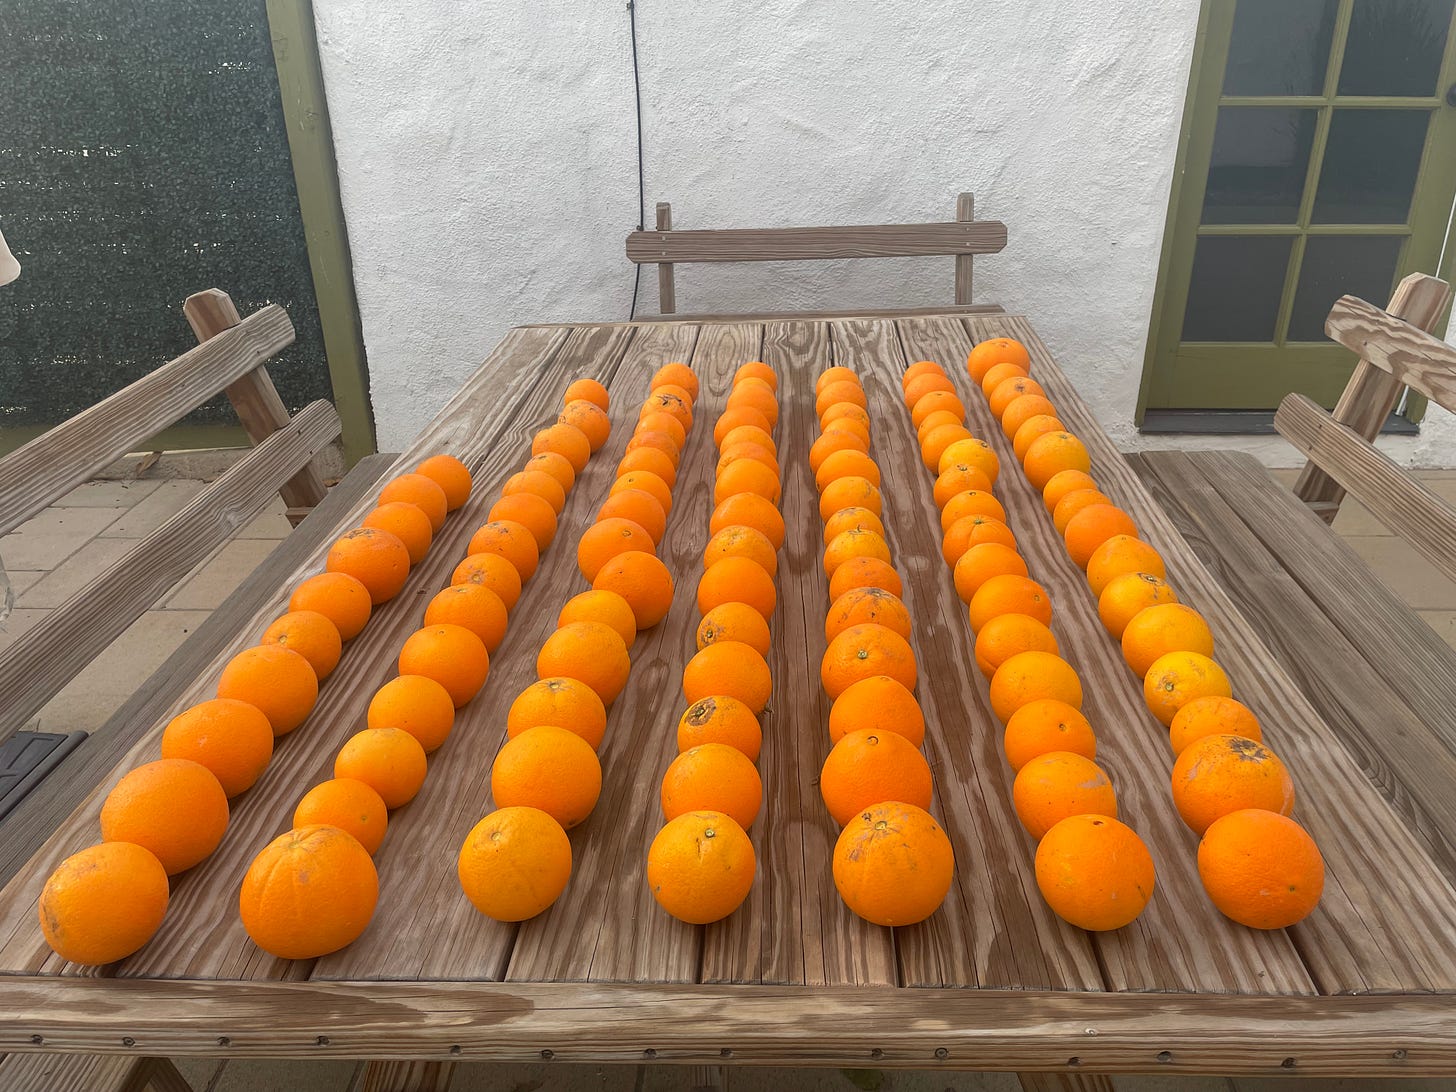 seven rows of oranges, nearly a hundred in total, lined up on a wooden picnic table